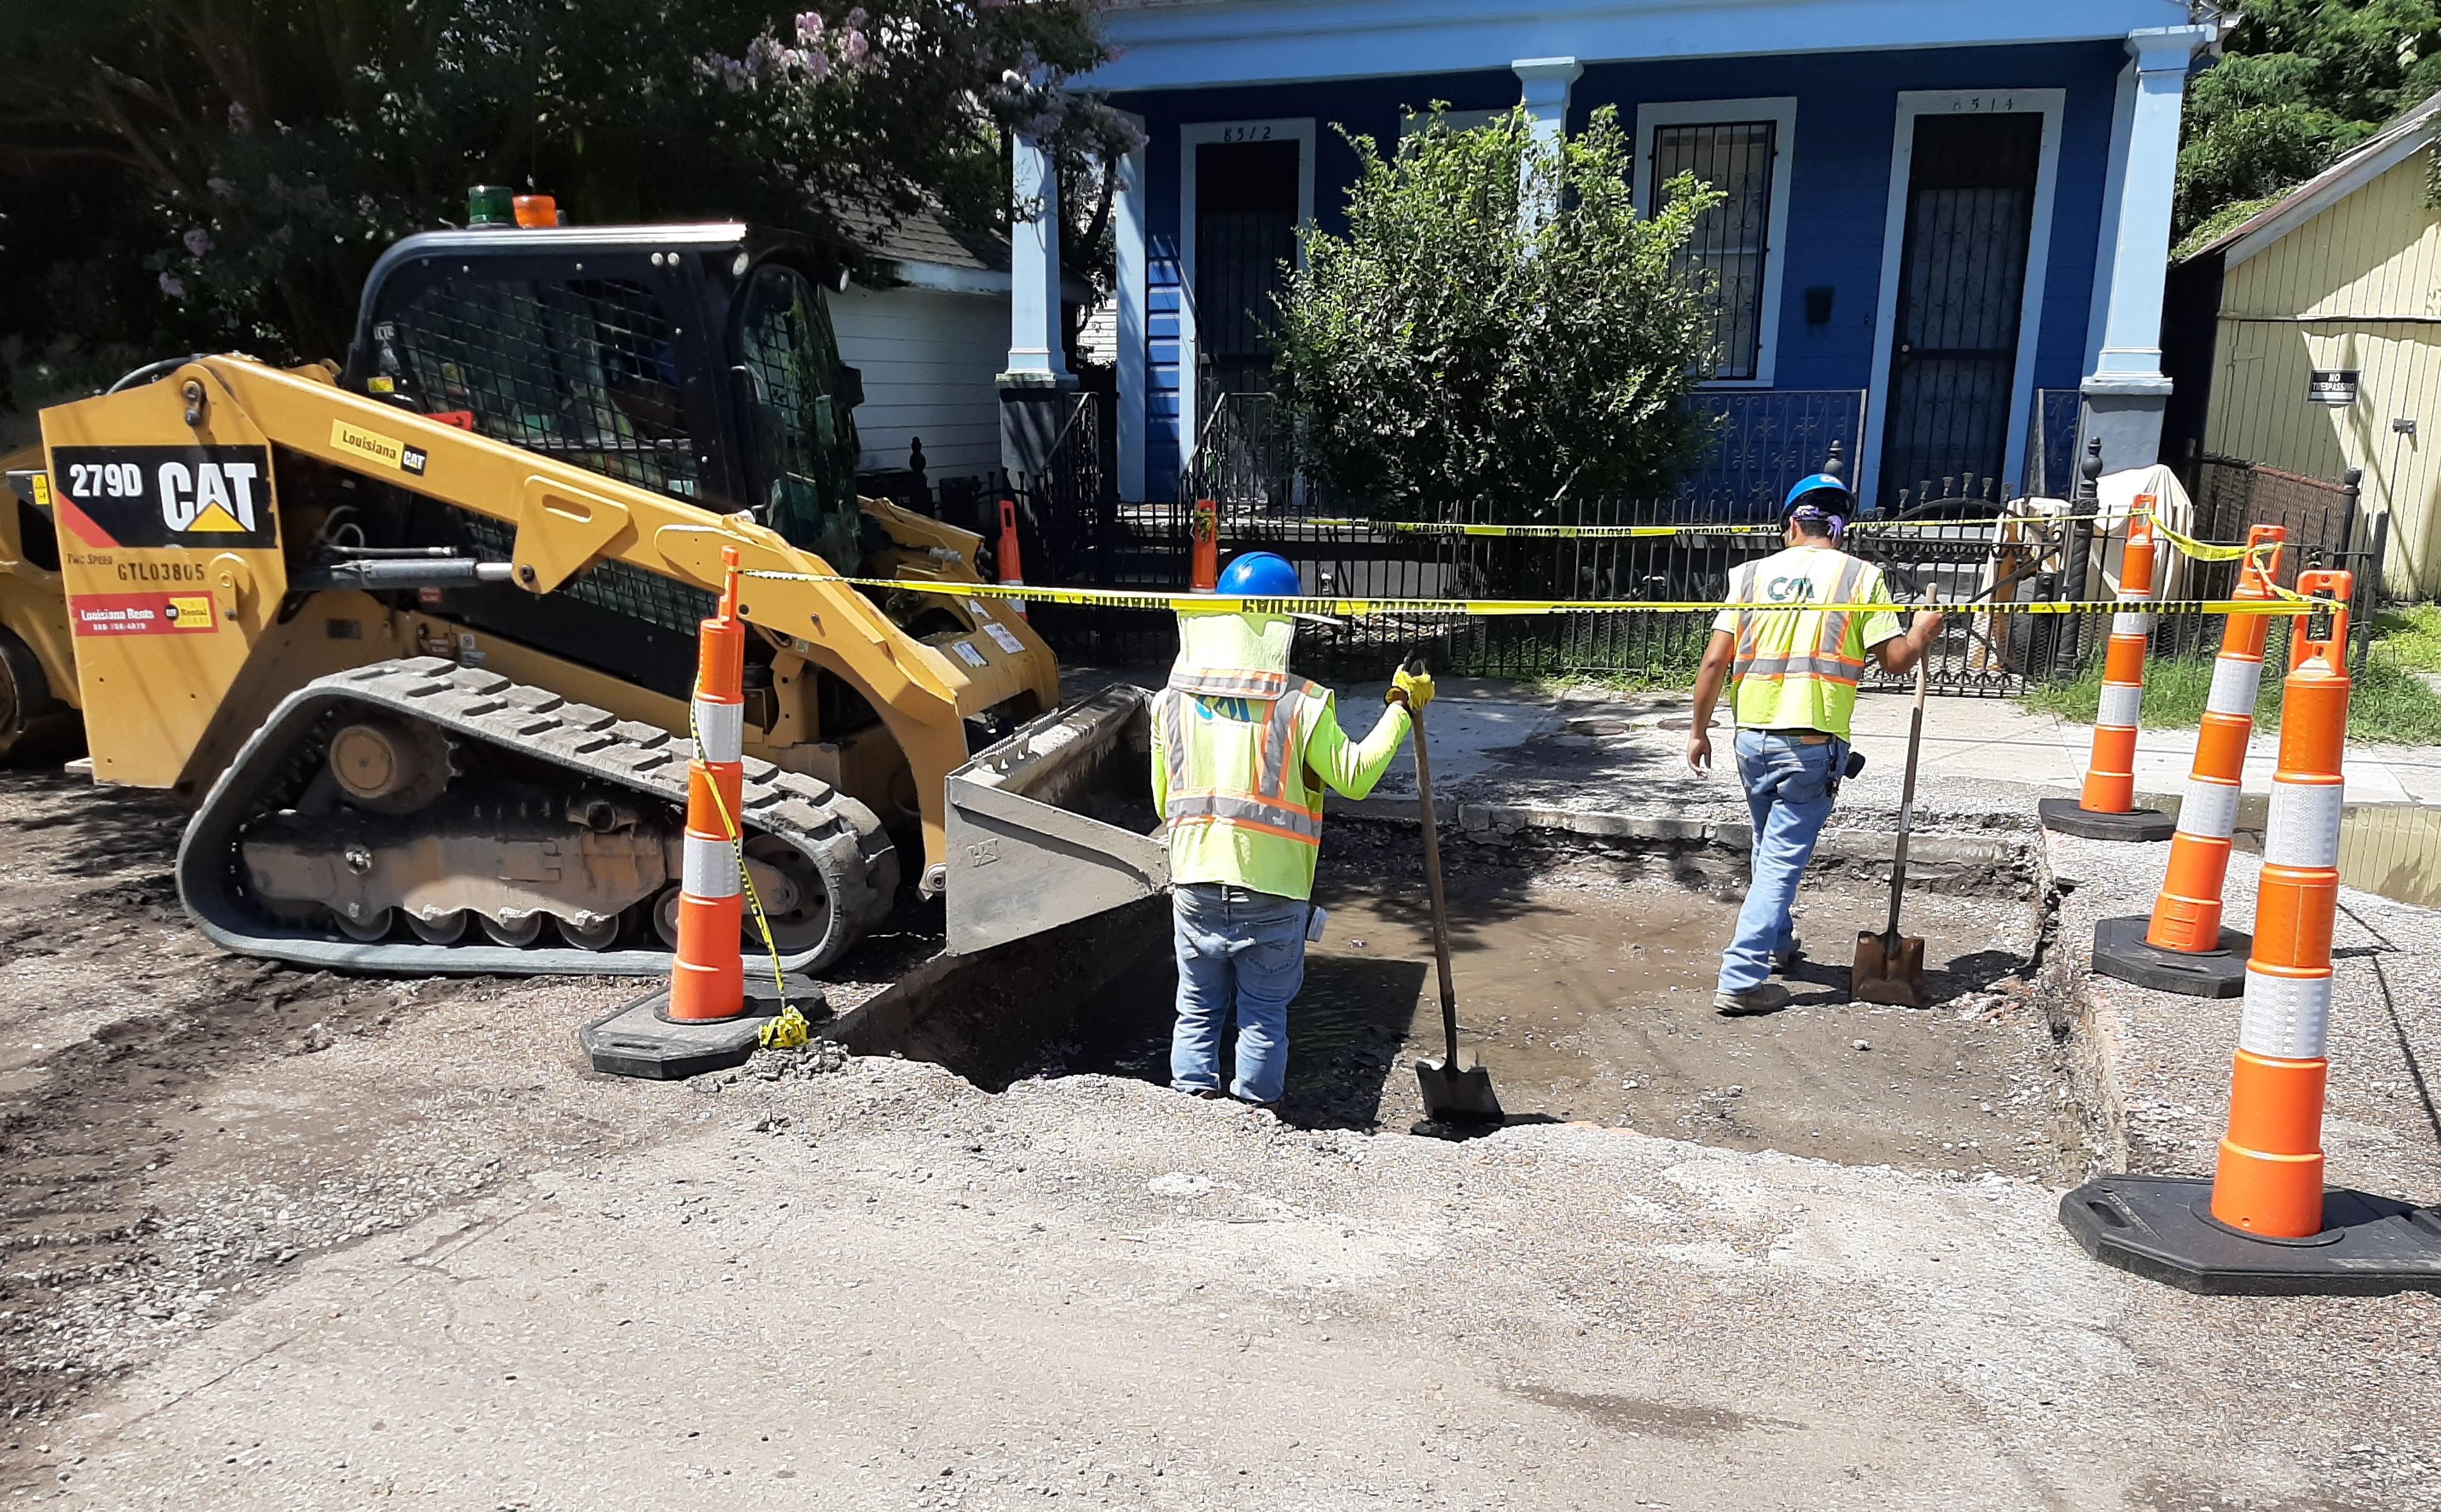 HOLLYGROVE, LEONIDAS GROUP A PROJECT CONTINUES PAVEMENT RESTORATION AND SEWER REPAIRS